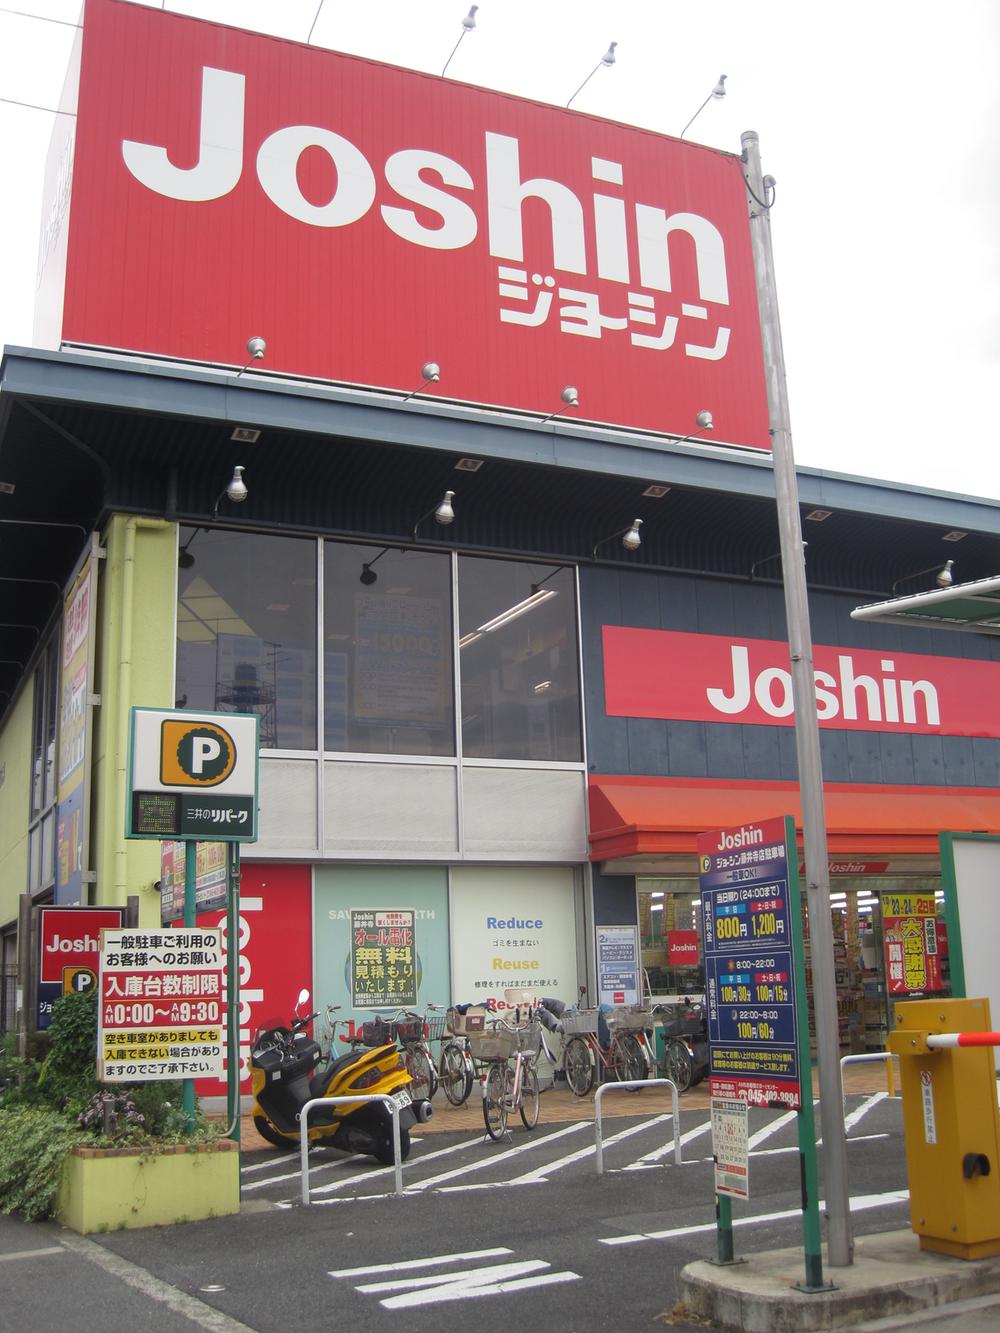 Shopping centre. Joshin also within walking distance of 1120m consumer electronics products are aligned to Joshin! !